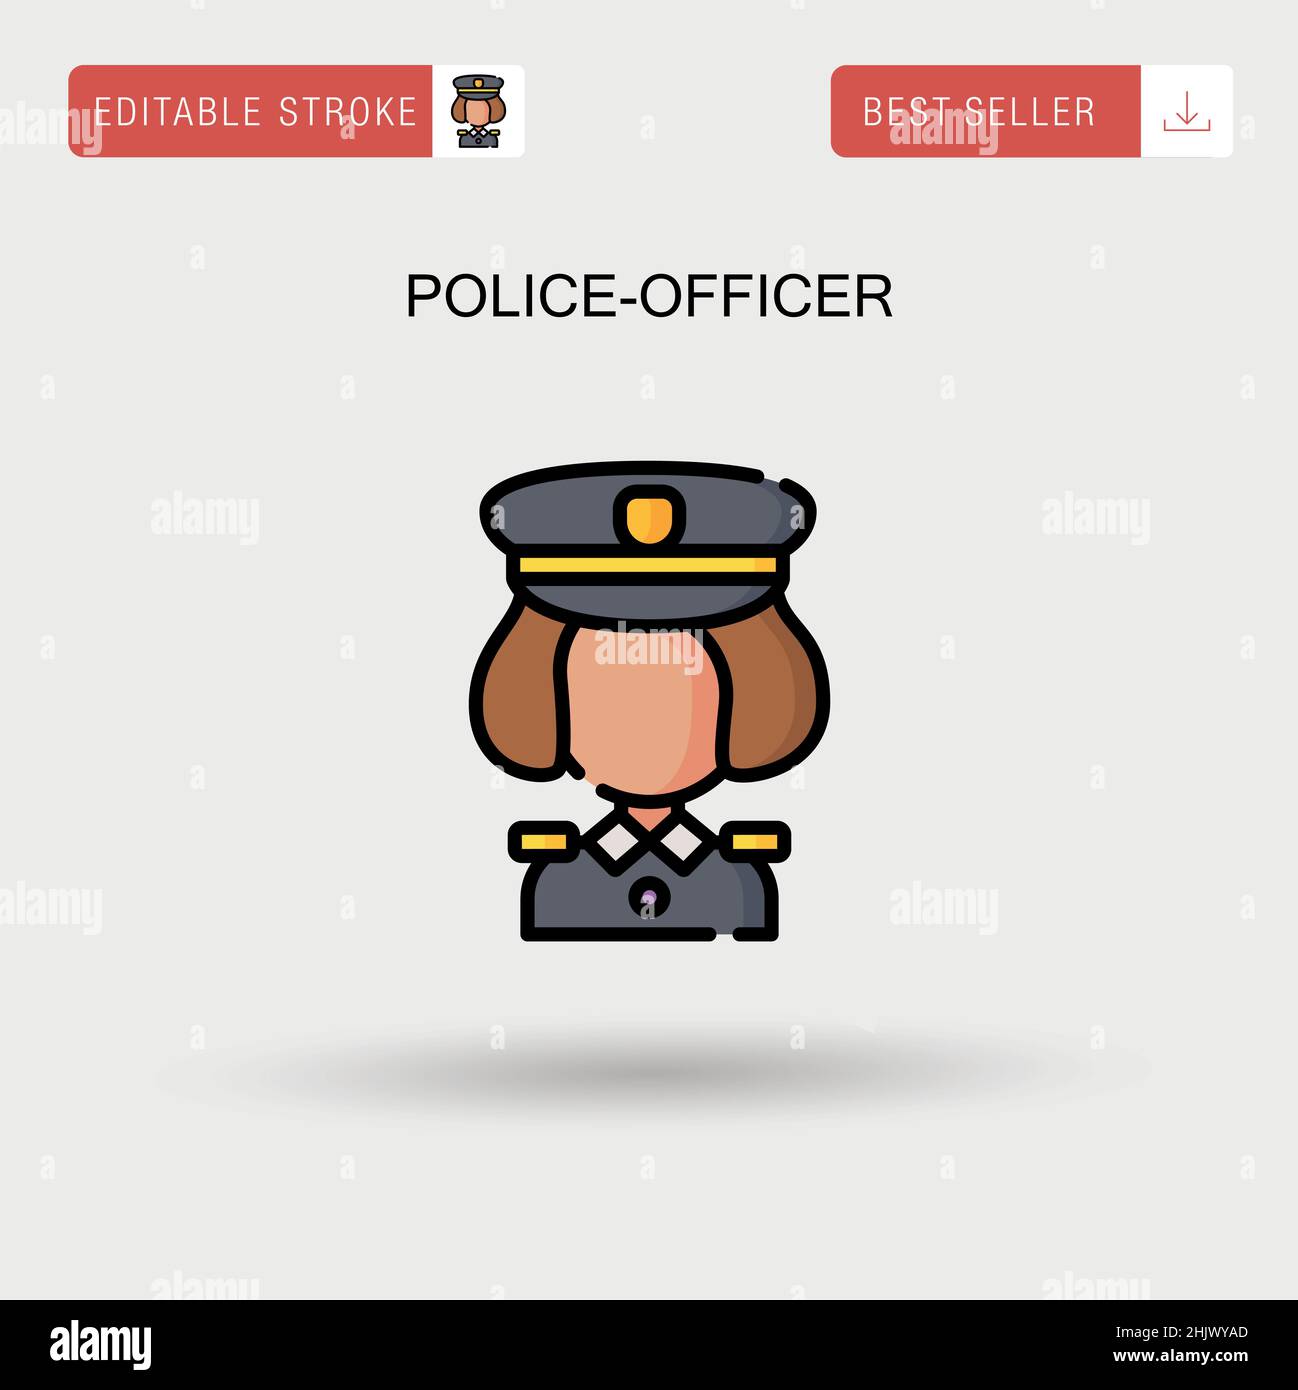 Police-officer Simple vector icon. Stock Vector